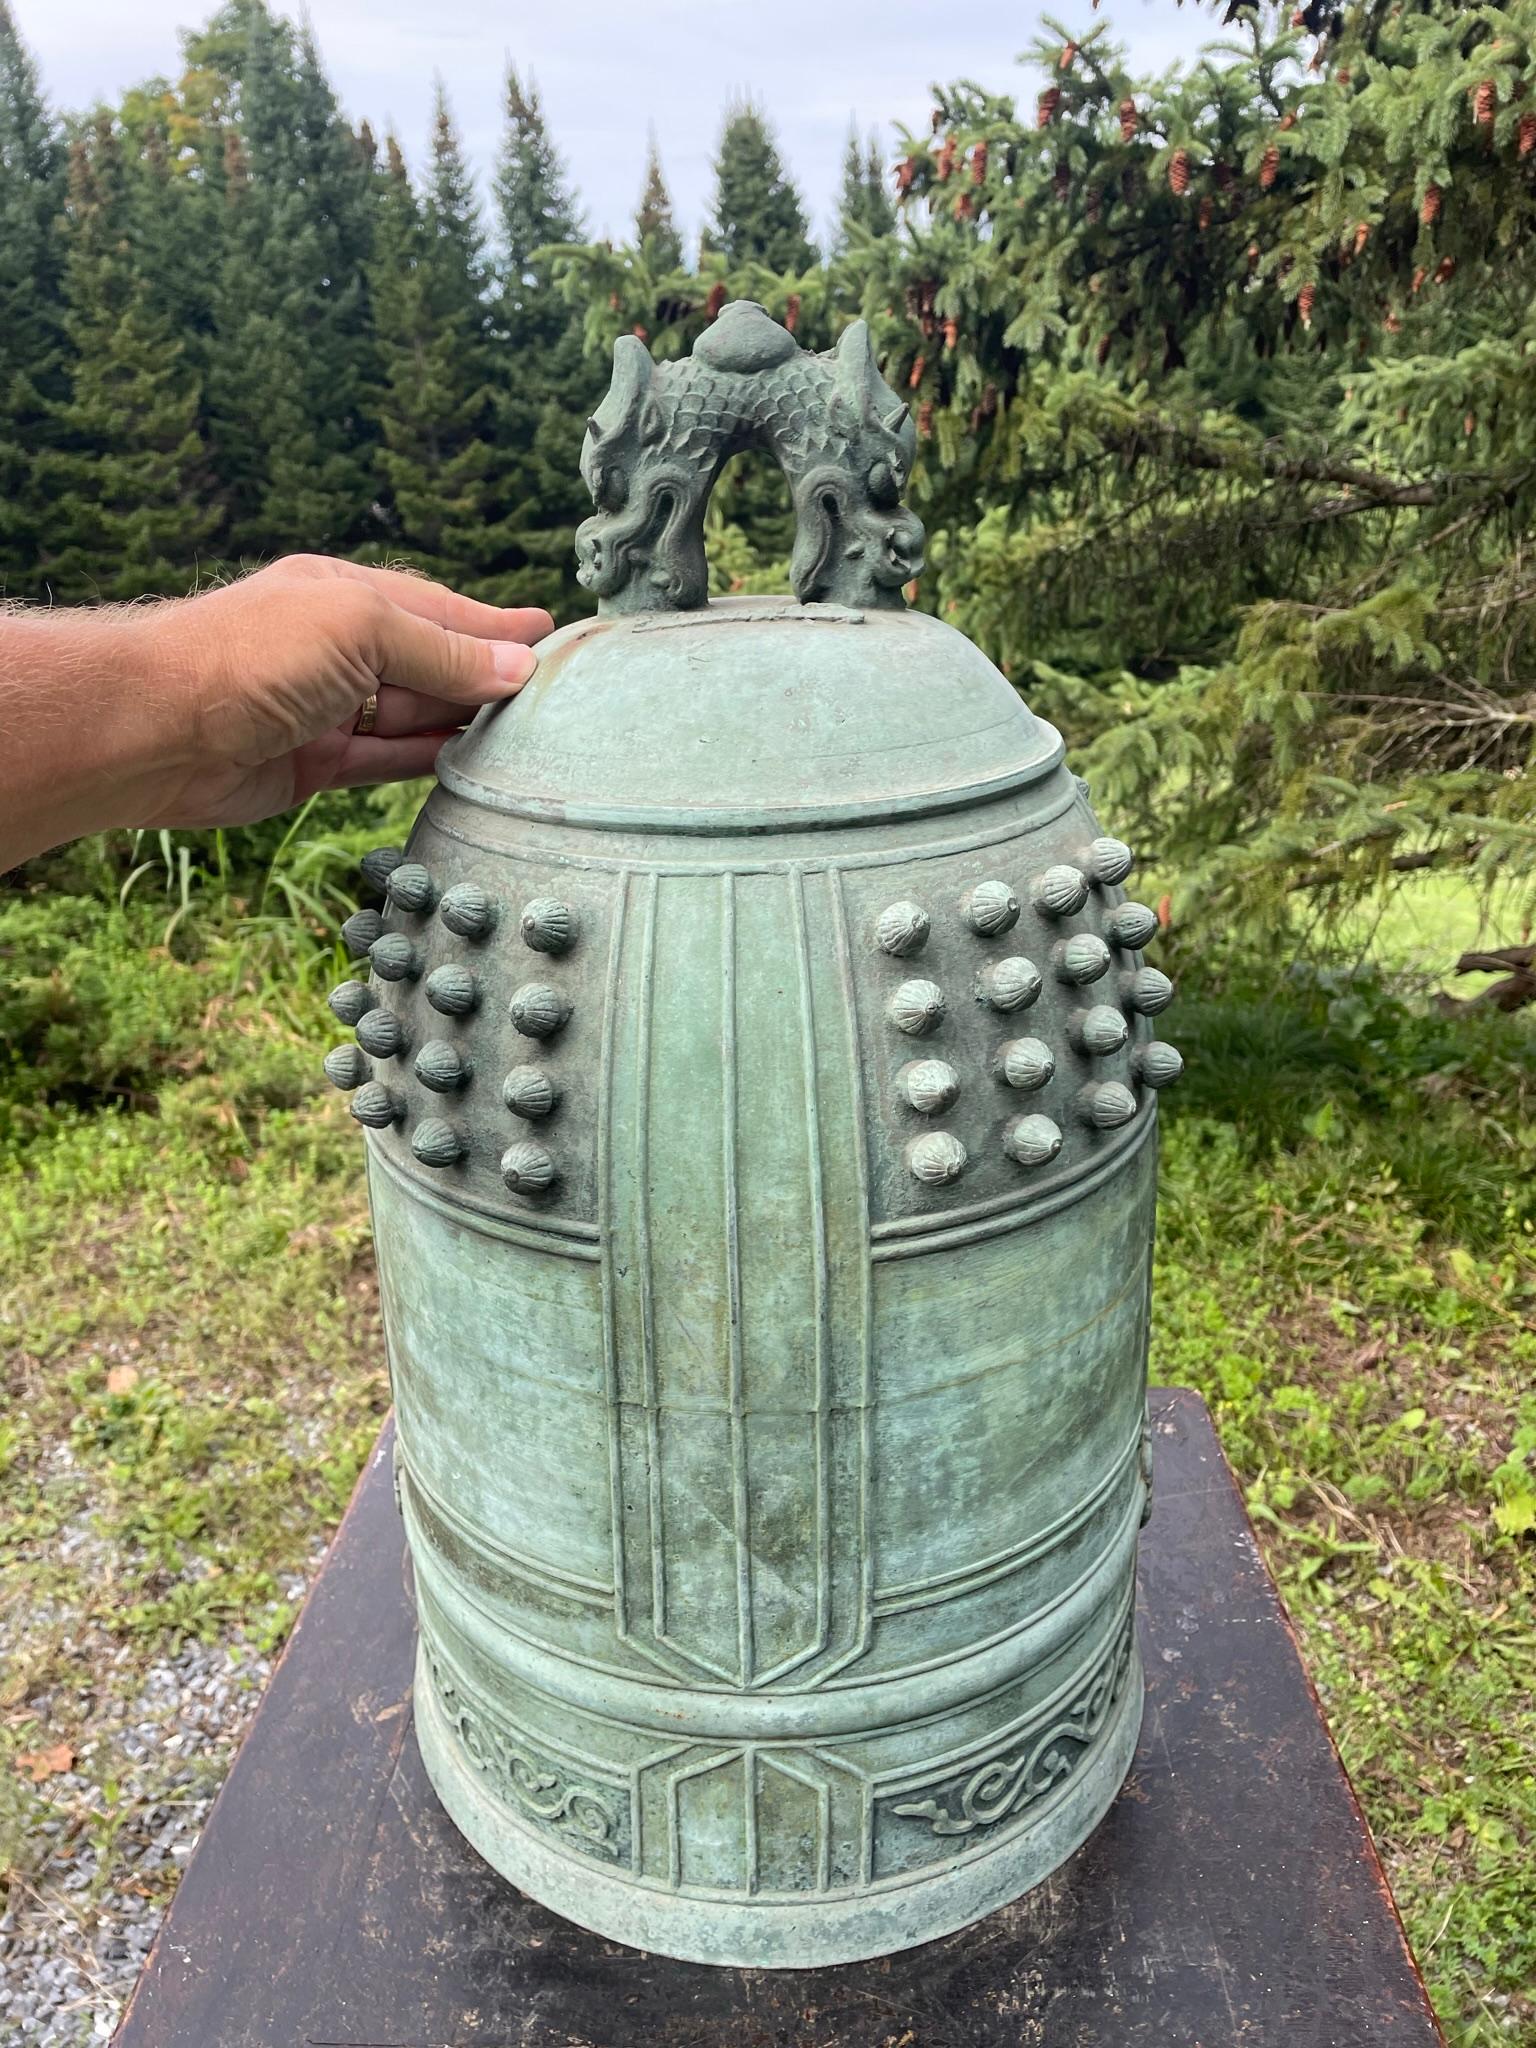 For your special garden setting or indoor display space.

Huge Hand Cast Blue Patina Bronze Bell With Multiple Signatures, Bold pleasing sound

Beautiful deep resonating ring tones await the new owner of this huge one-of-a-kind antique bronze bell